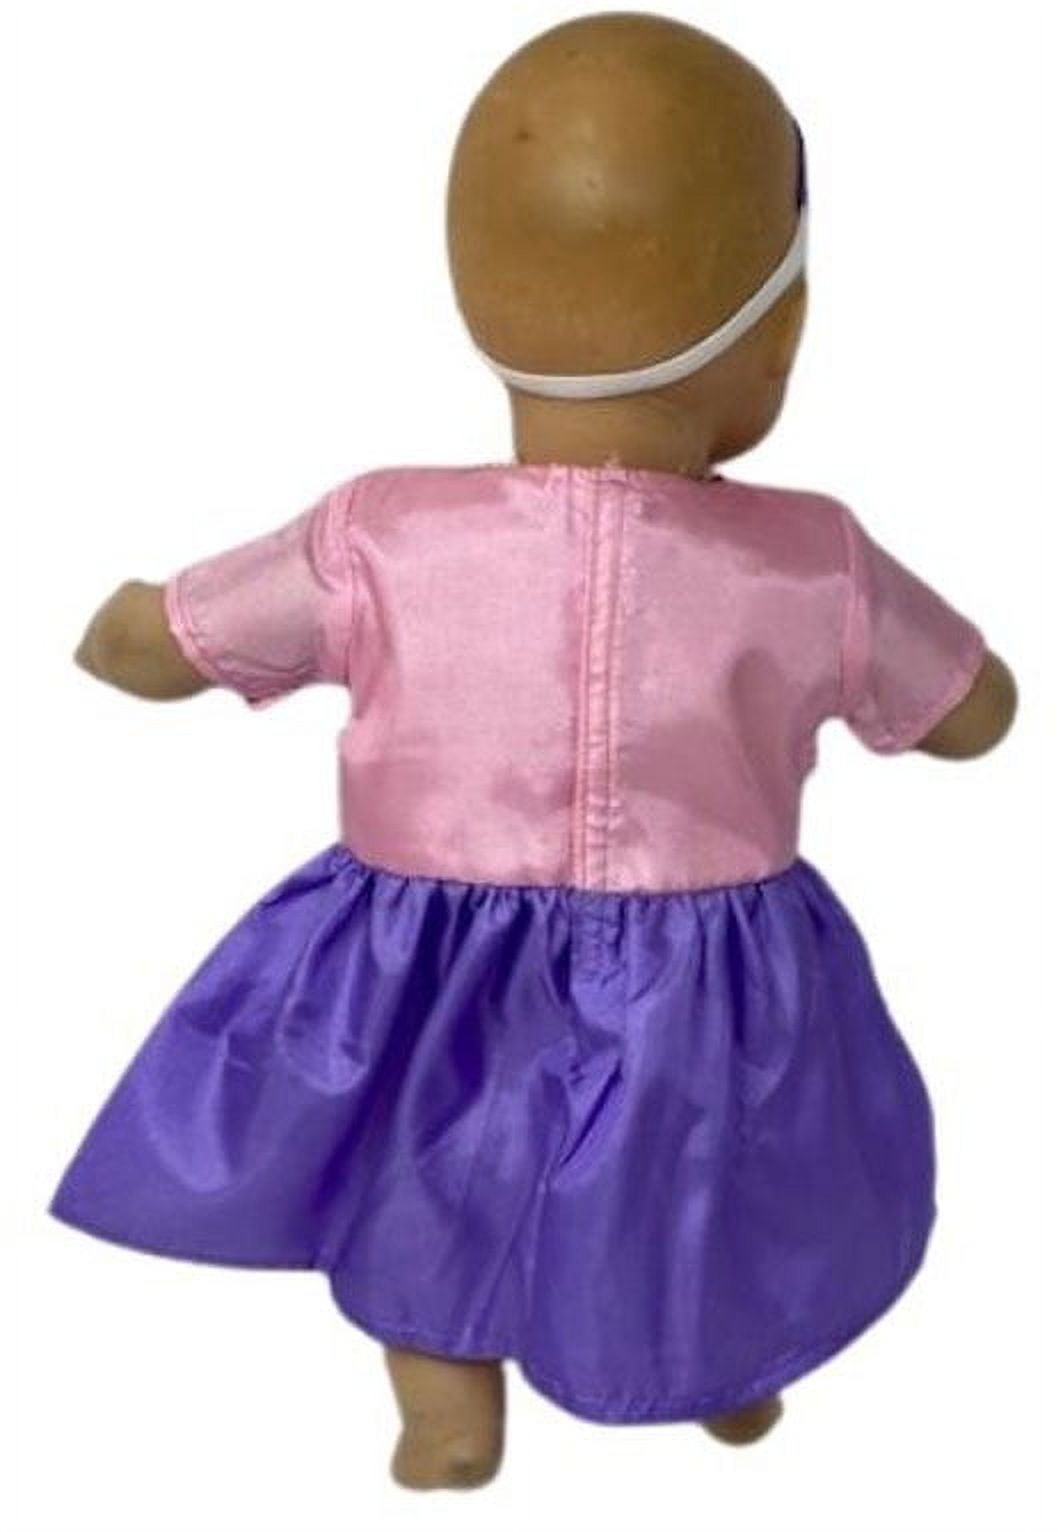 Doll Clothes Superstore Sweet Dress For 15-16 Inch Baby Dolls : Target